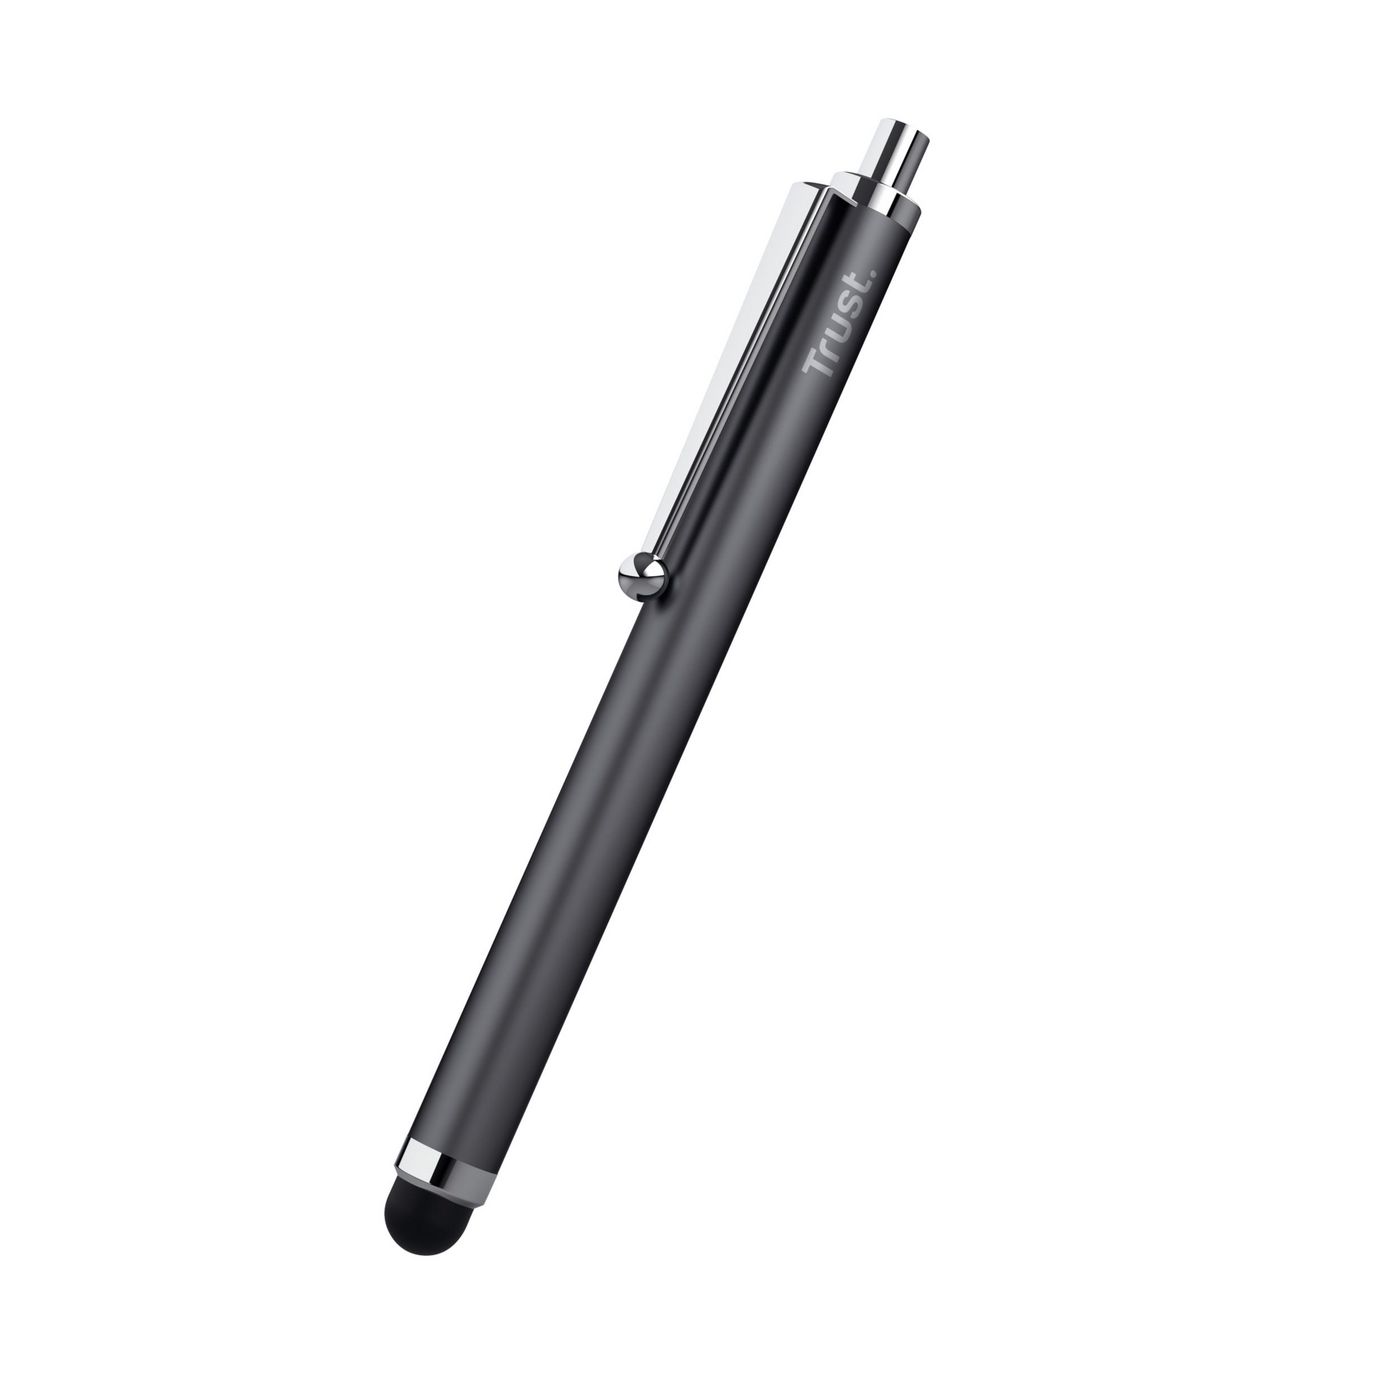 Stylus Pen for touch tablets